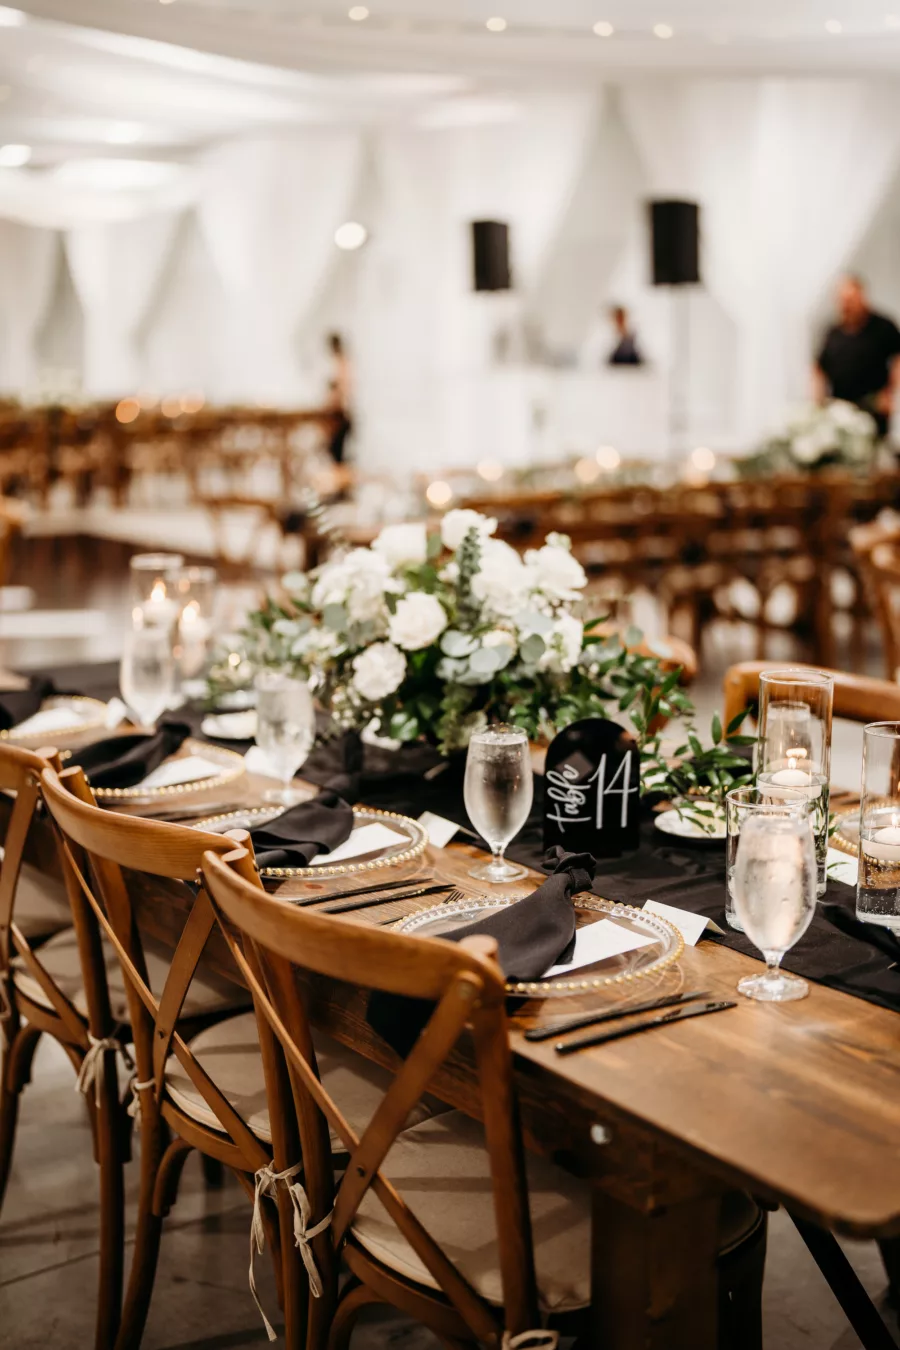 Elegant Rustic Black and White Wedding Reception Tablescape Ideas | Wooden Feasting Tables, Crossback Chairs | White Rose and Greenery Centerpiece Decor Inspiration